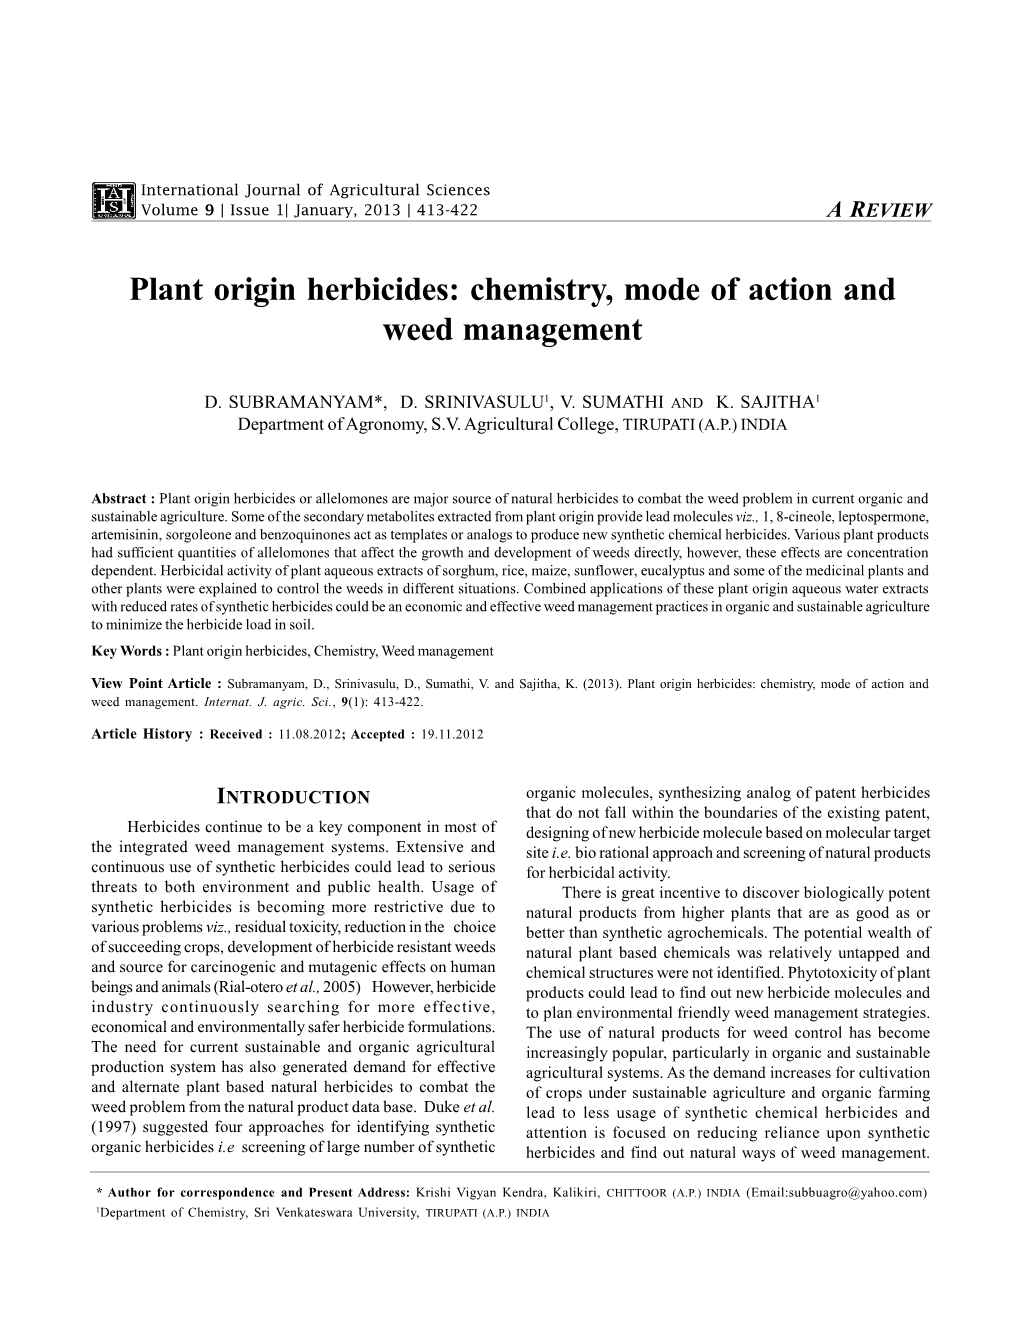 Plant Origin Herbicides: Chemistry, Mode of Action and Weed Management